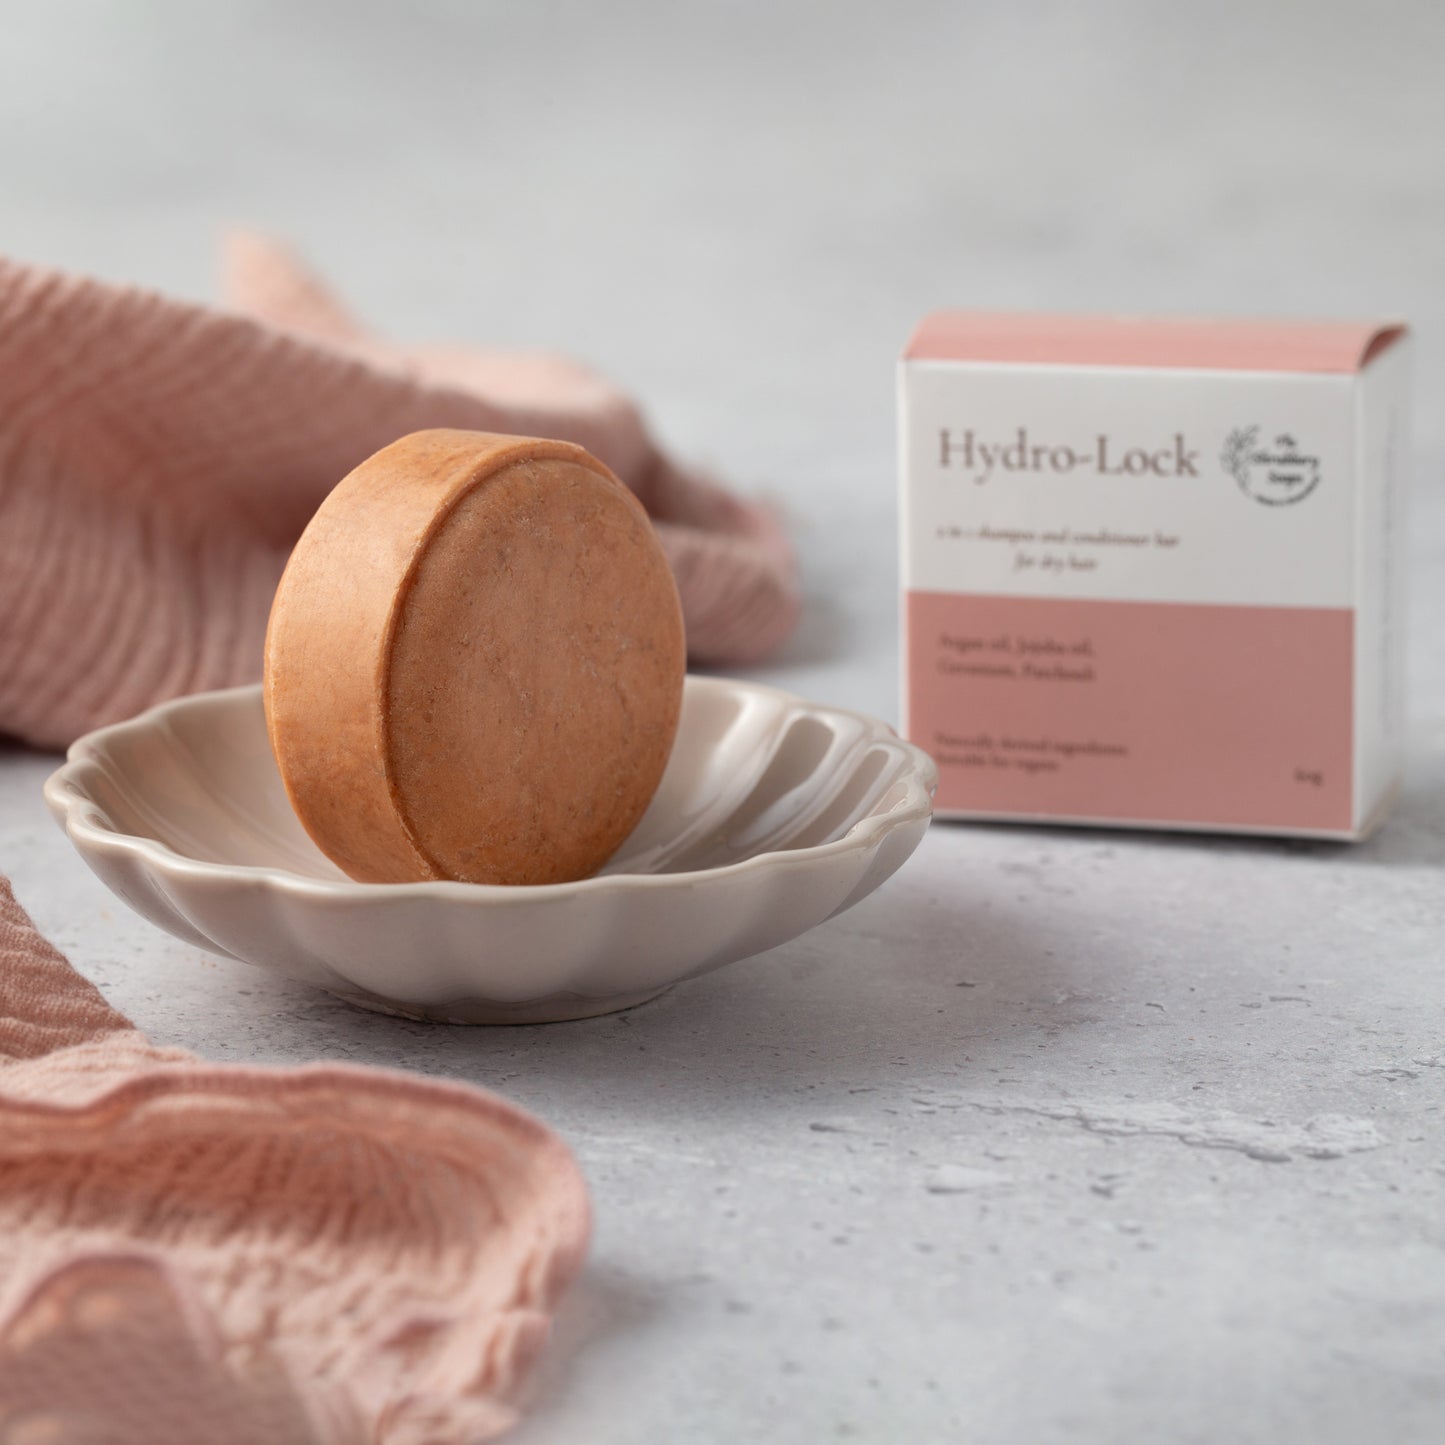 Hydro-Lock Shampoo Bar for normal to dry hair